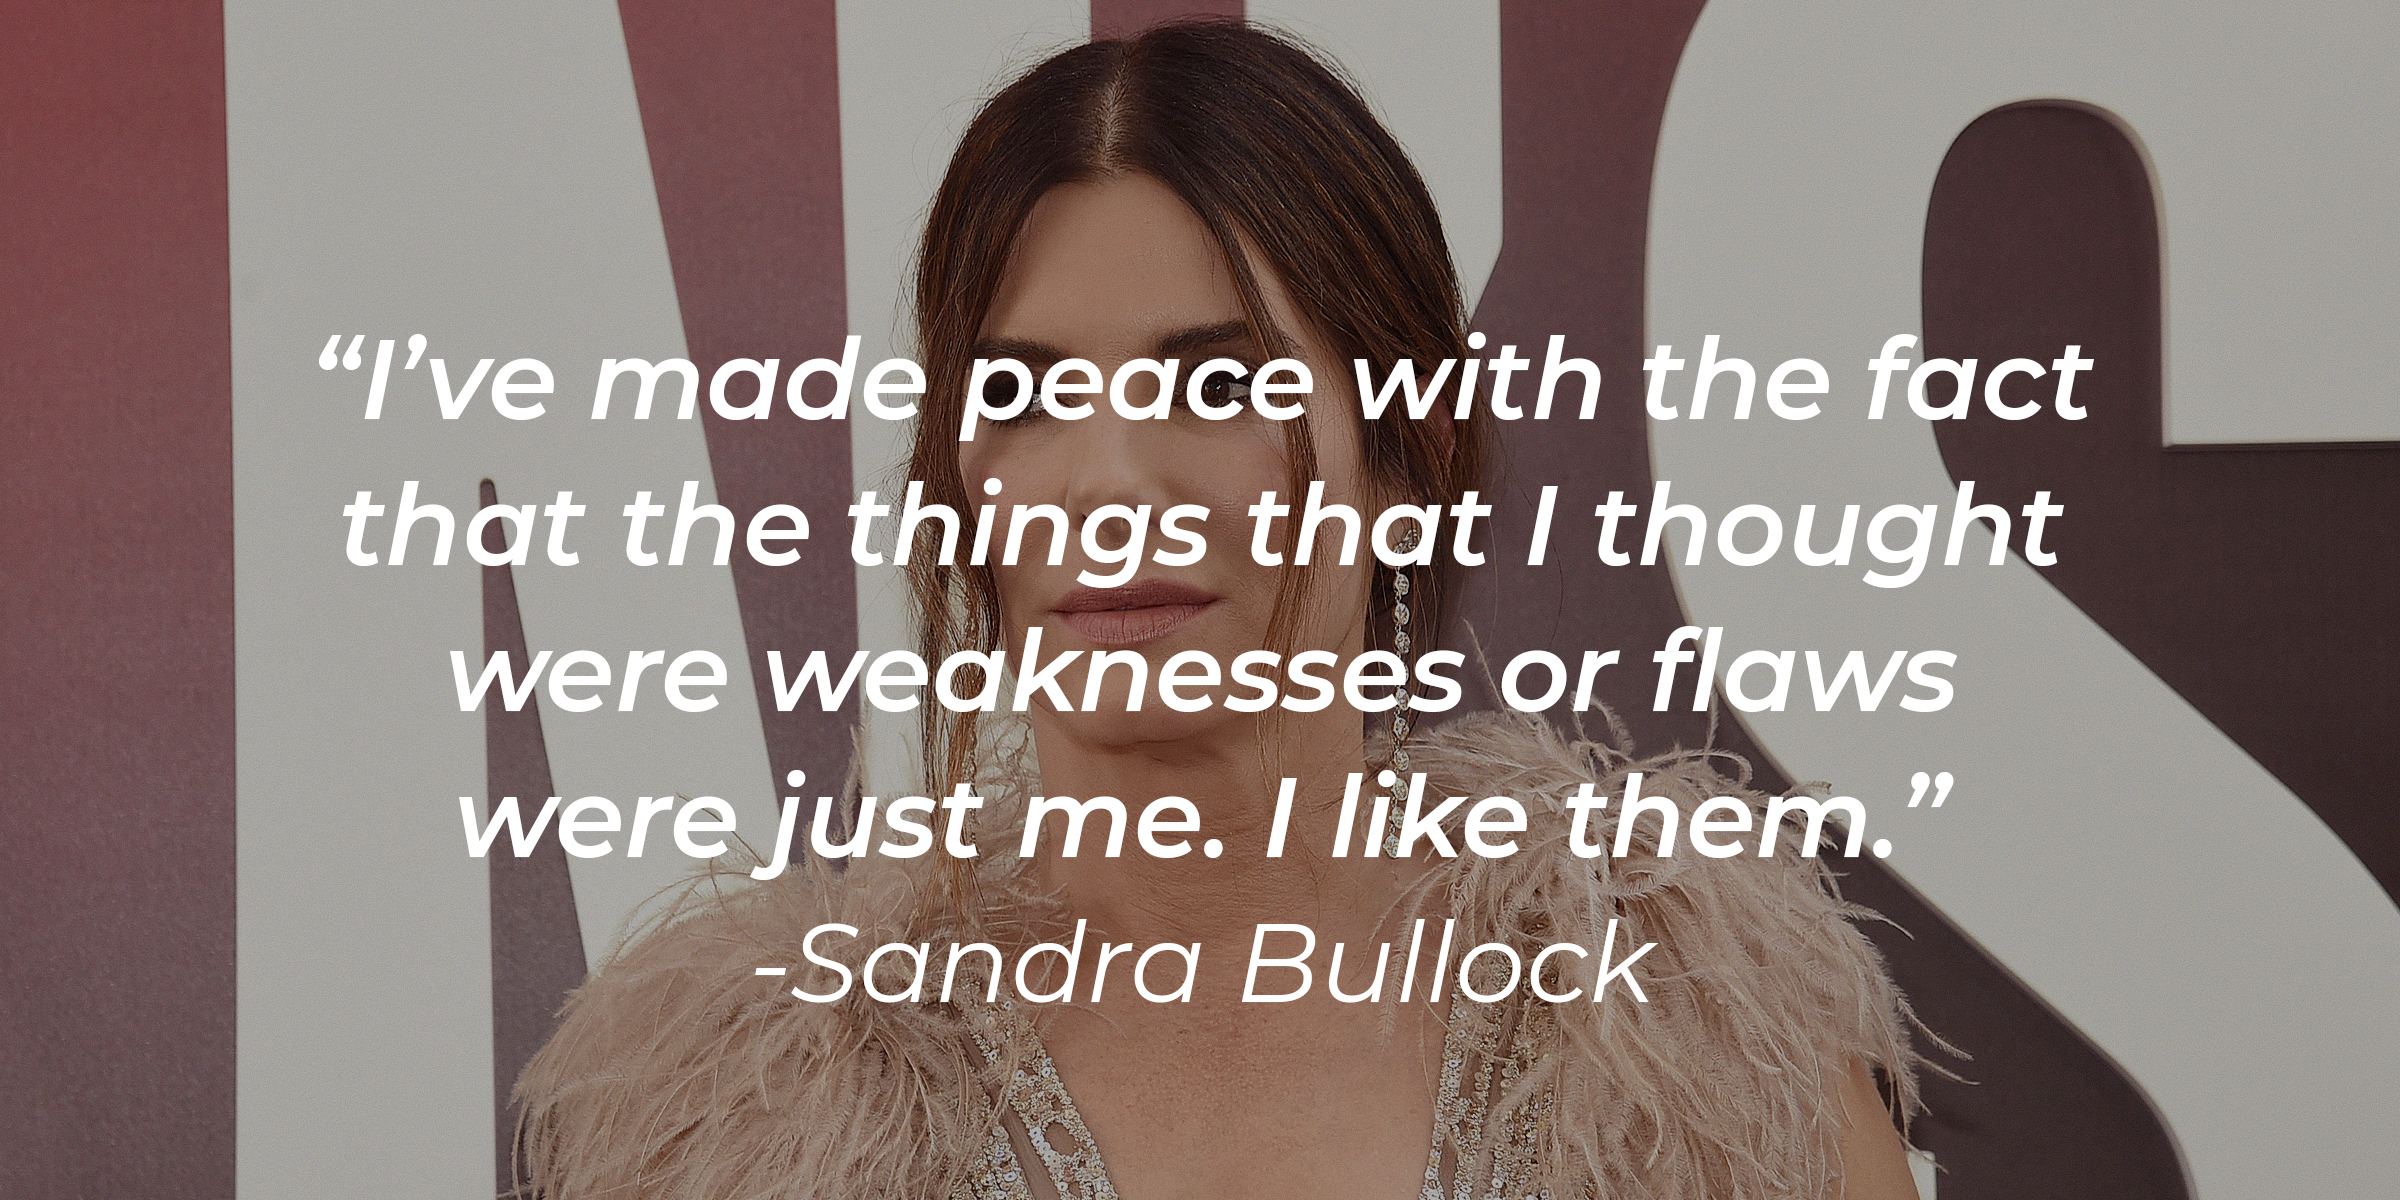 A photo of Sandra Bullock with Sandra Bullock's quote: “I’ve made peace with the fact that the things that I thought were weaknesses or flaws were just me. I like them.” | Source: Getty Images